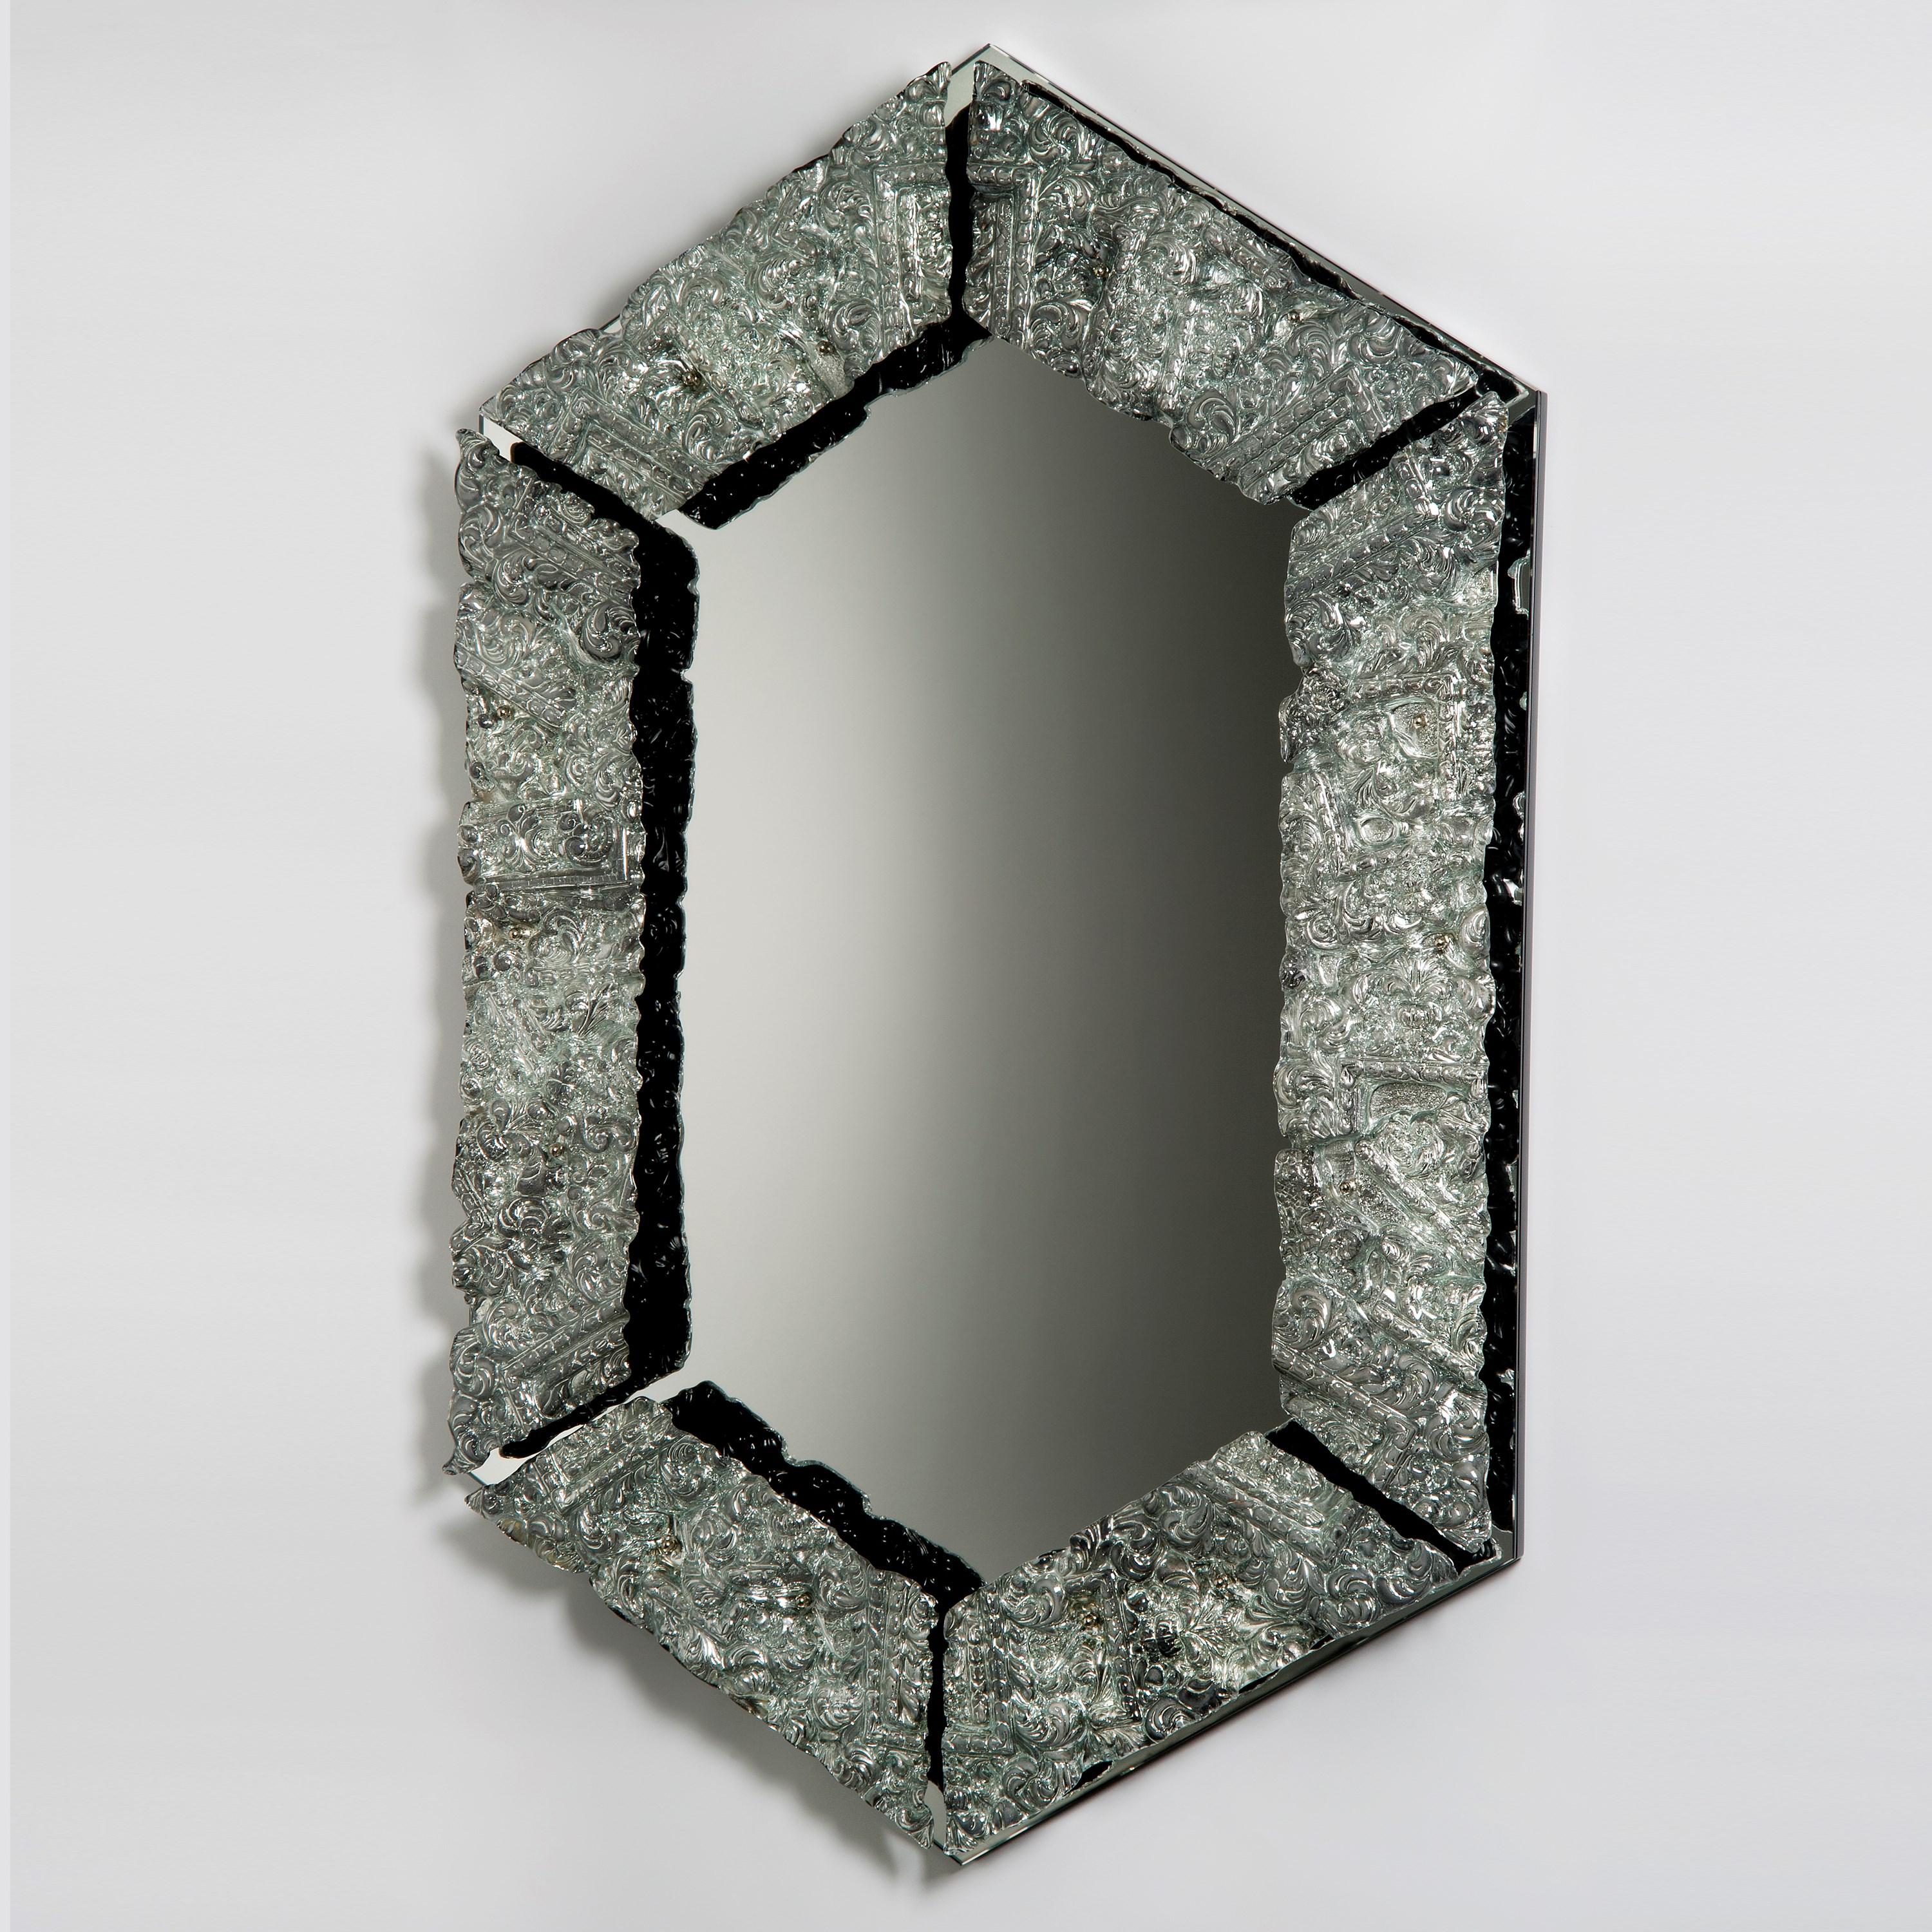 'Framed Mirror' is a unique mirror by the British artist, Brett Manley.

Each of Brett Manley's artworks are created as a result of trying to comprehend her chosen medium with greater understanding. The aim is to answer questions and elucidate the